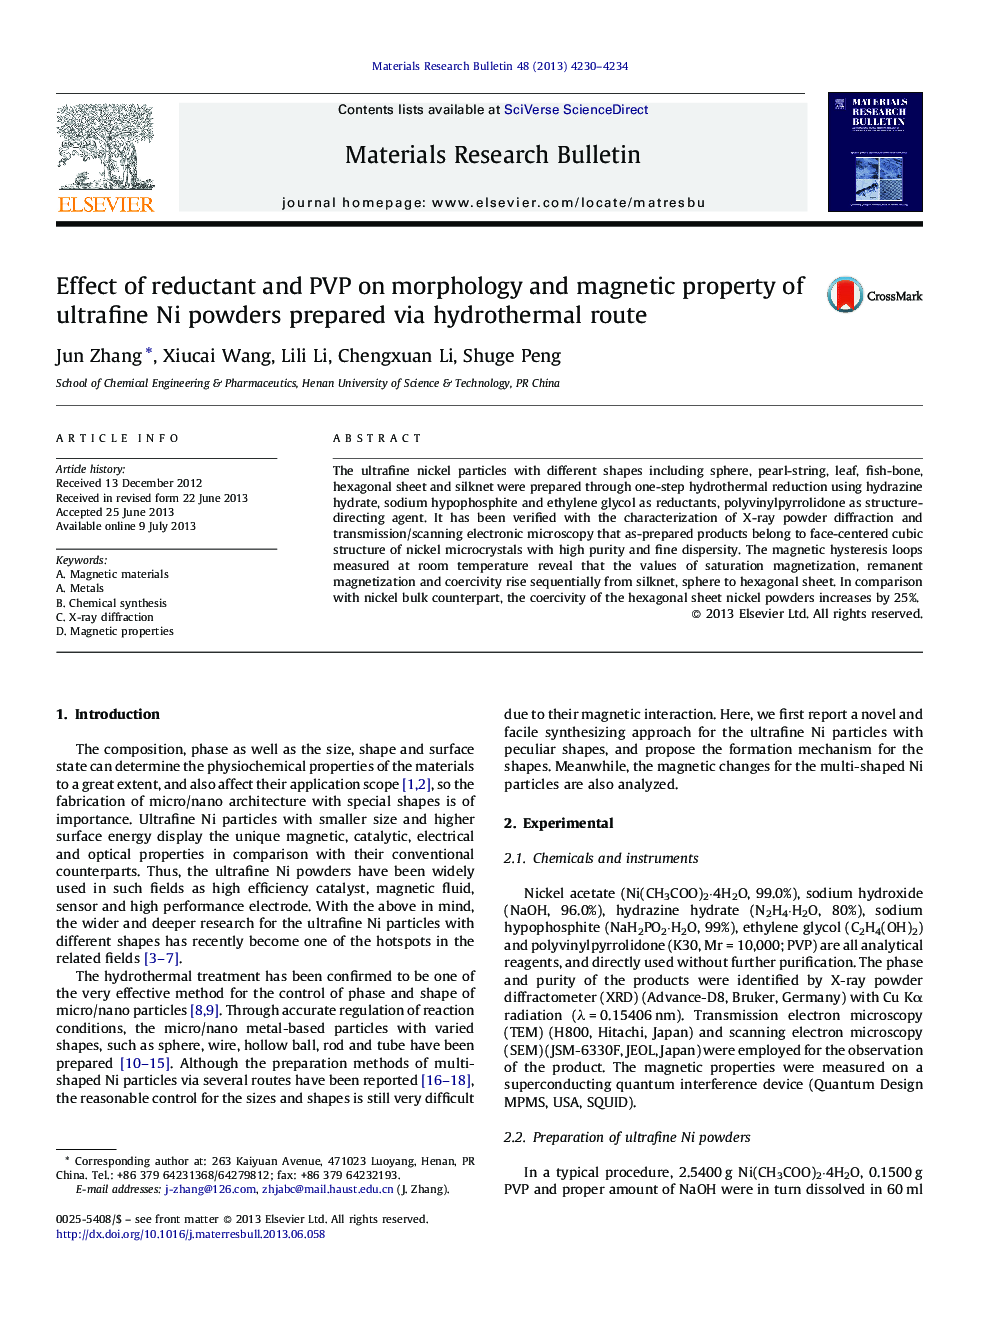 Effect of reductant and PVP on morphology and magnetic property of ultrafine Ni powders prepared via hydrothermal route